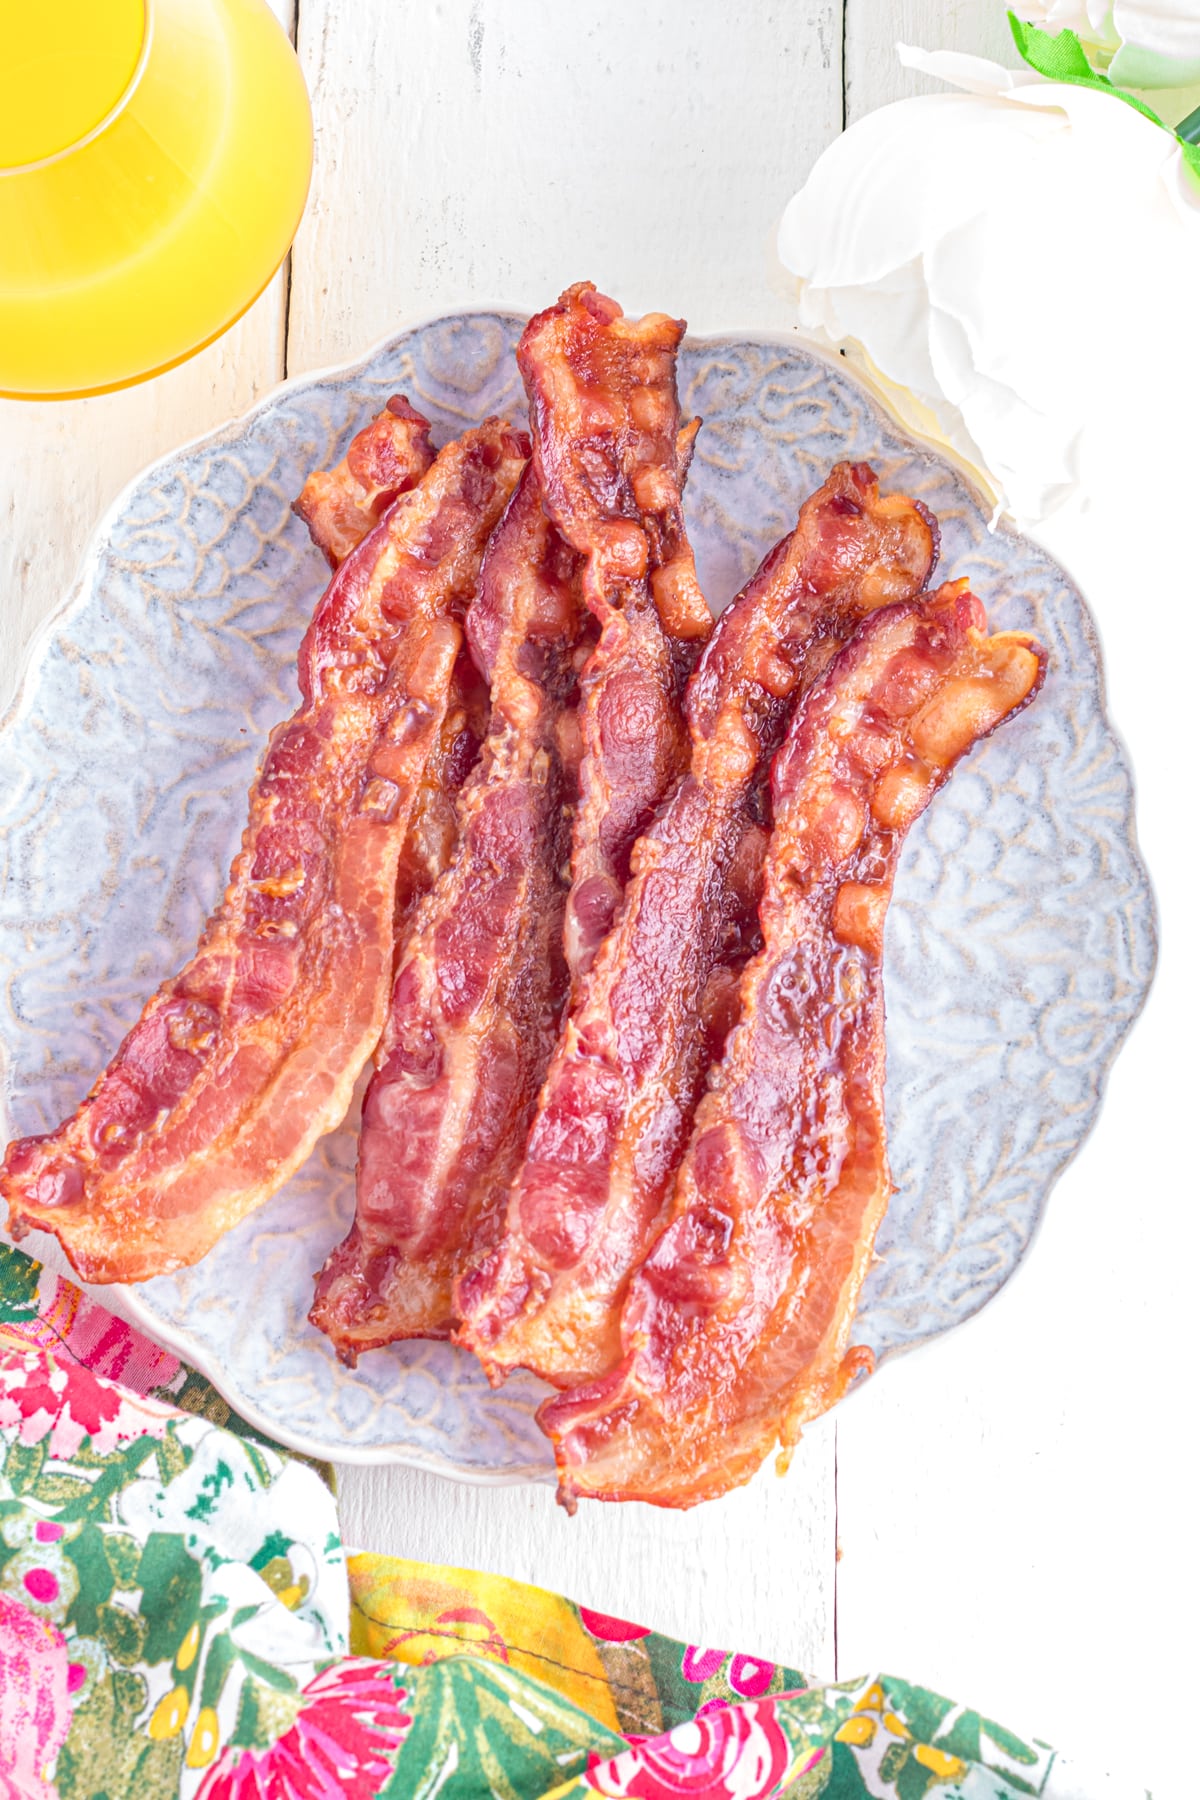 Toaster oven bacon on a plate on the table with a floral linen.